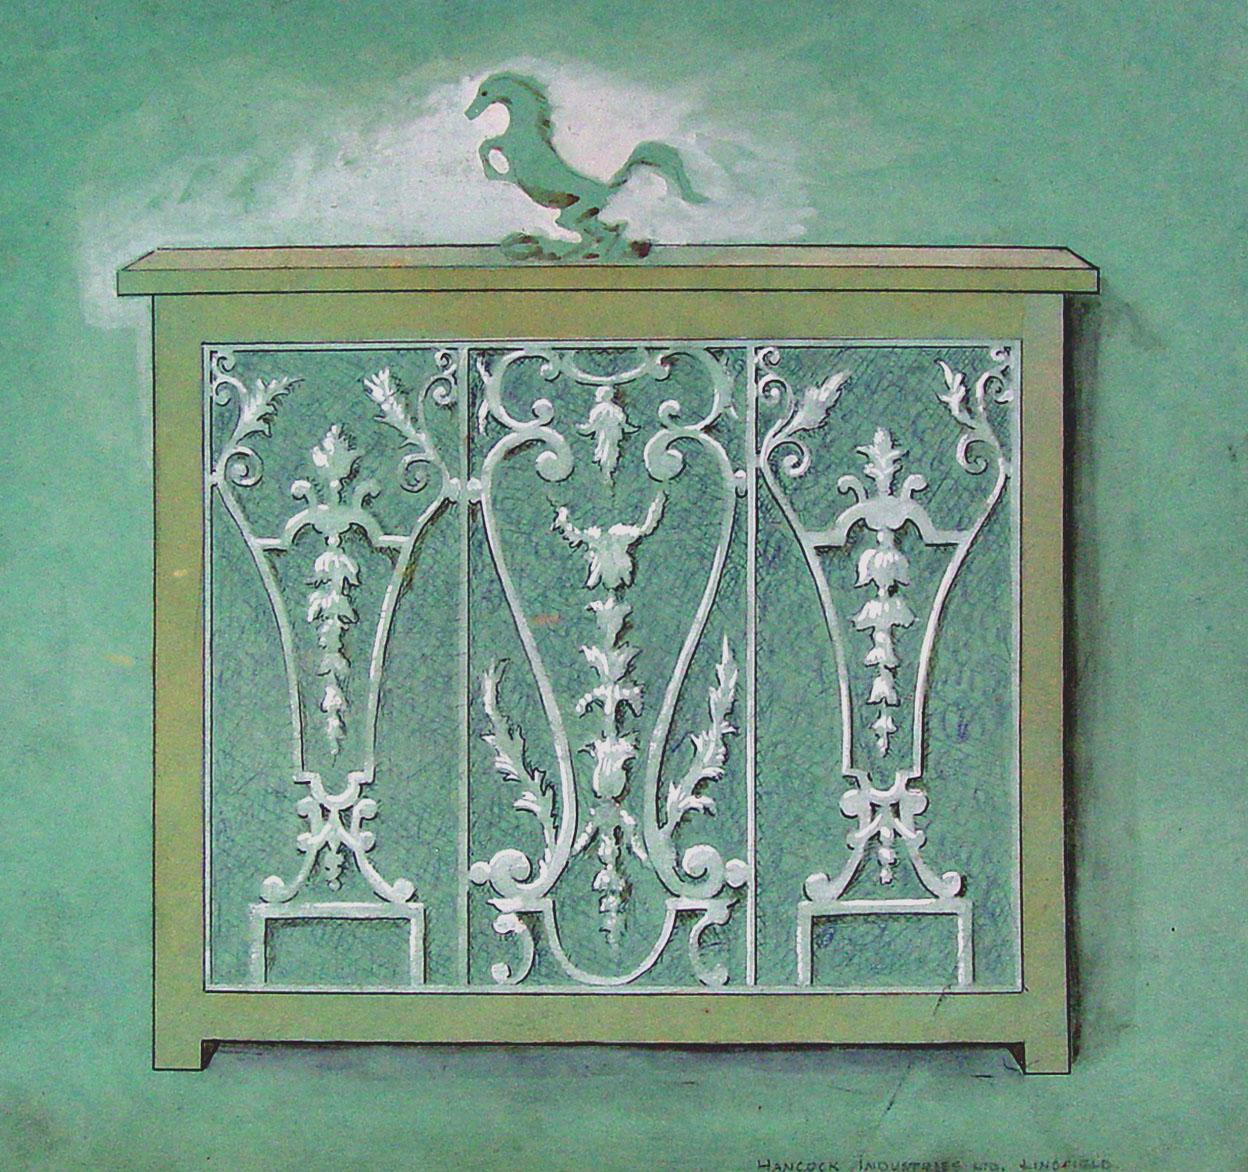 Vintage mid 20th century gouache on turquoise paper of an artist rendering design for wrought iron design on a cabinet. Pencil notation on lower right margin 